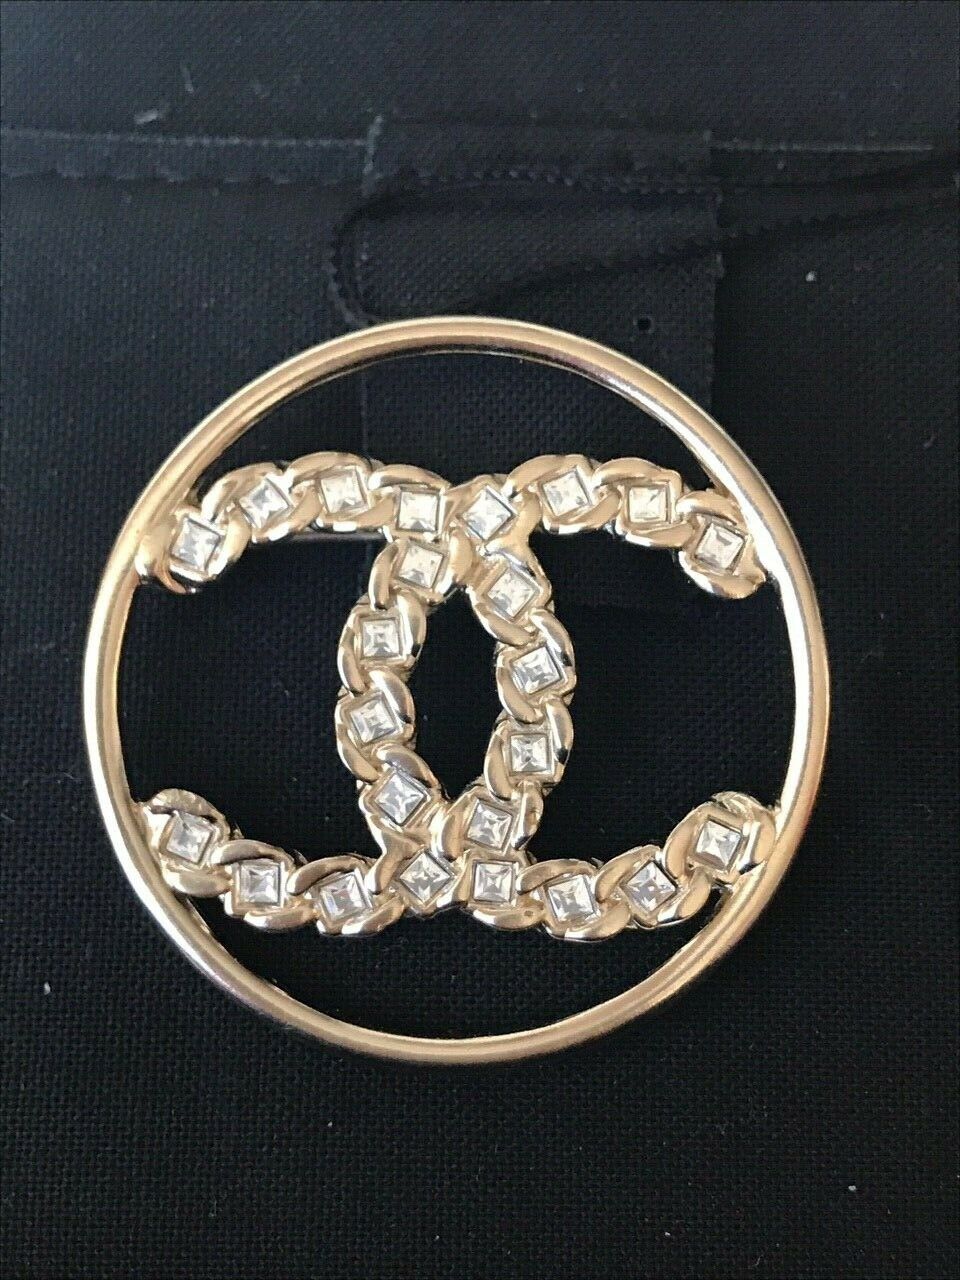 CHANEL 2019 GOLDEN TONE CC LOGO WHITE CRYSTALS ROUND BROOCH PIN CHARM